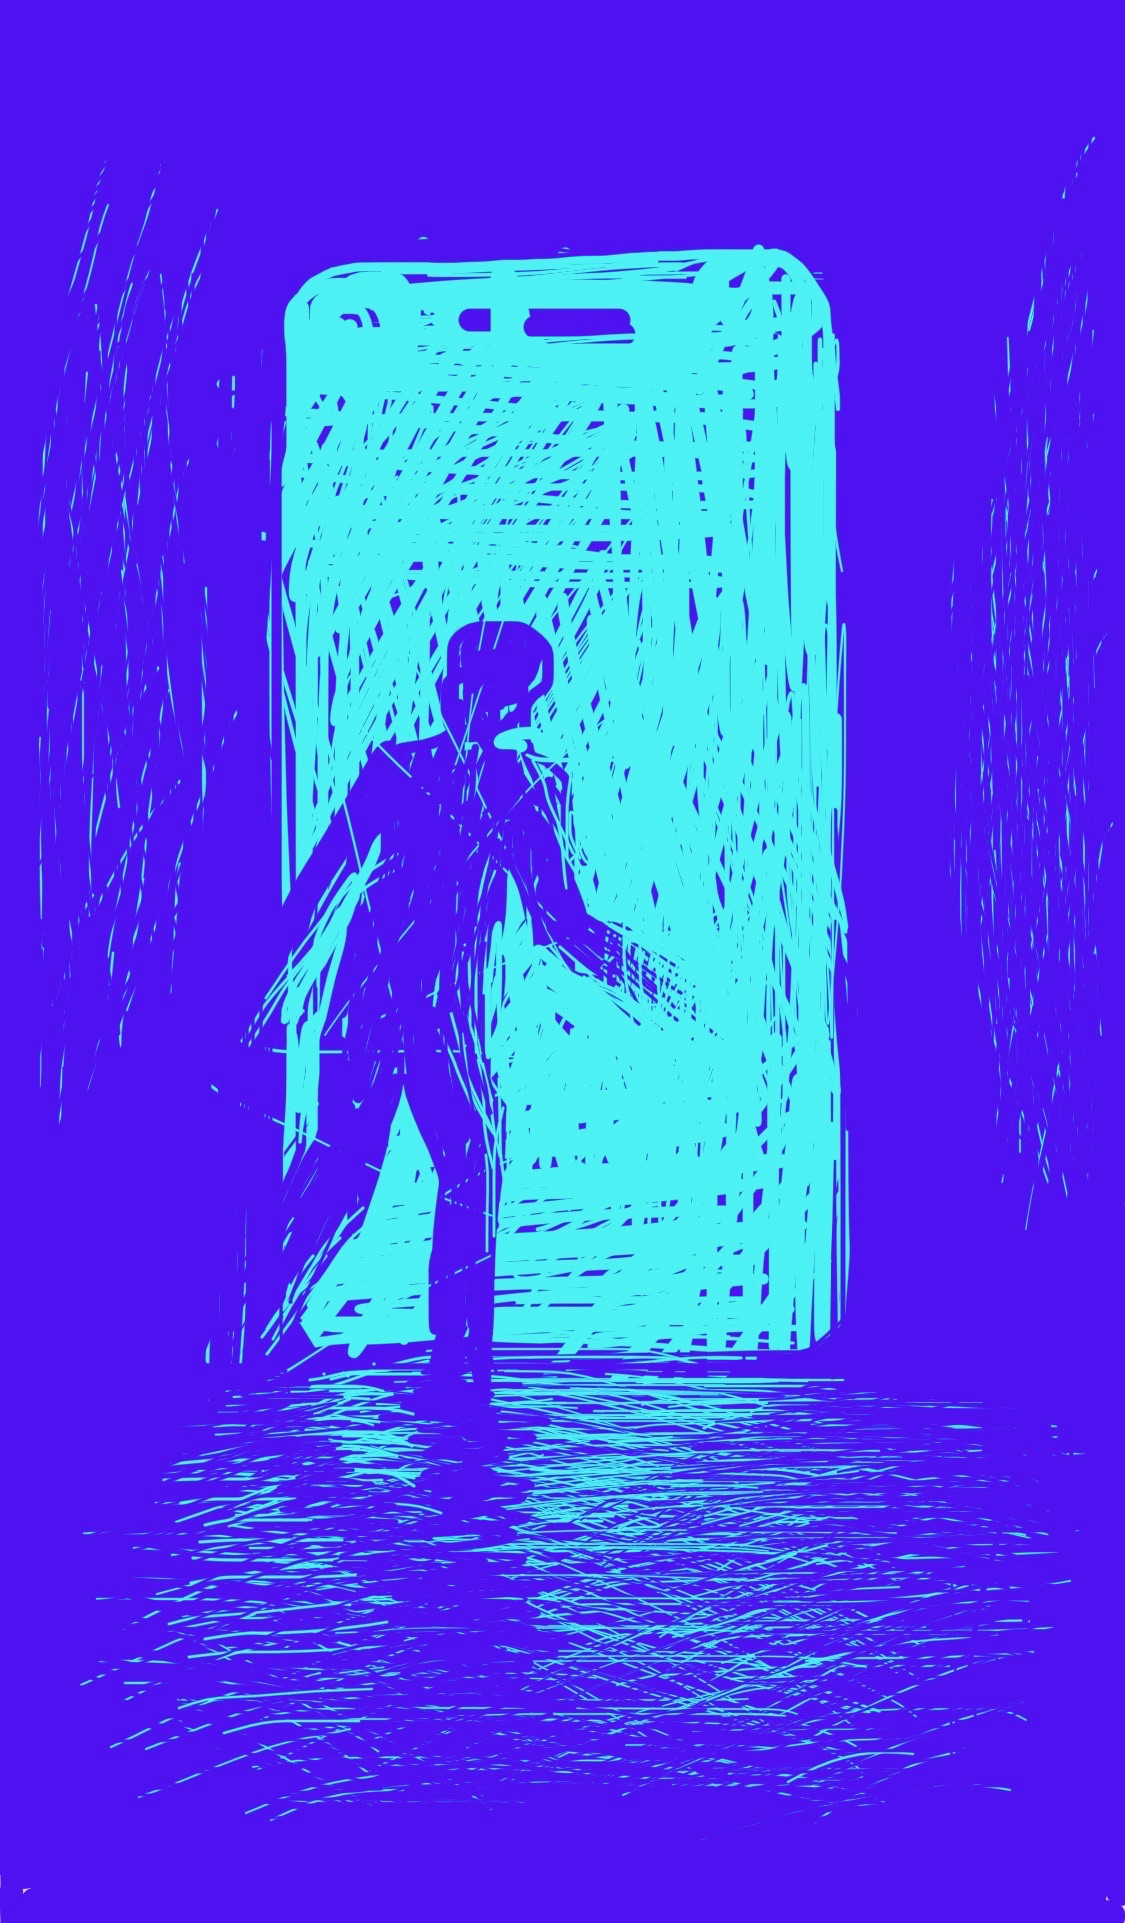 A person stands silhouetted against a ginat glowing phone screen